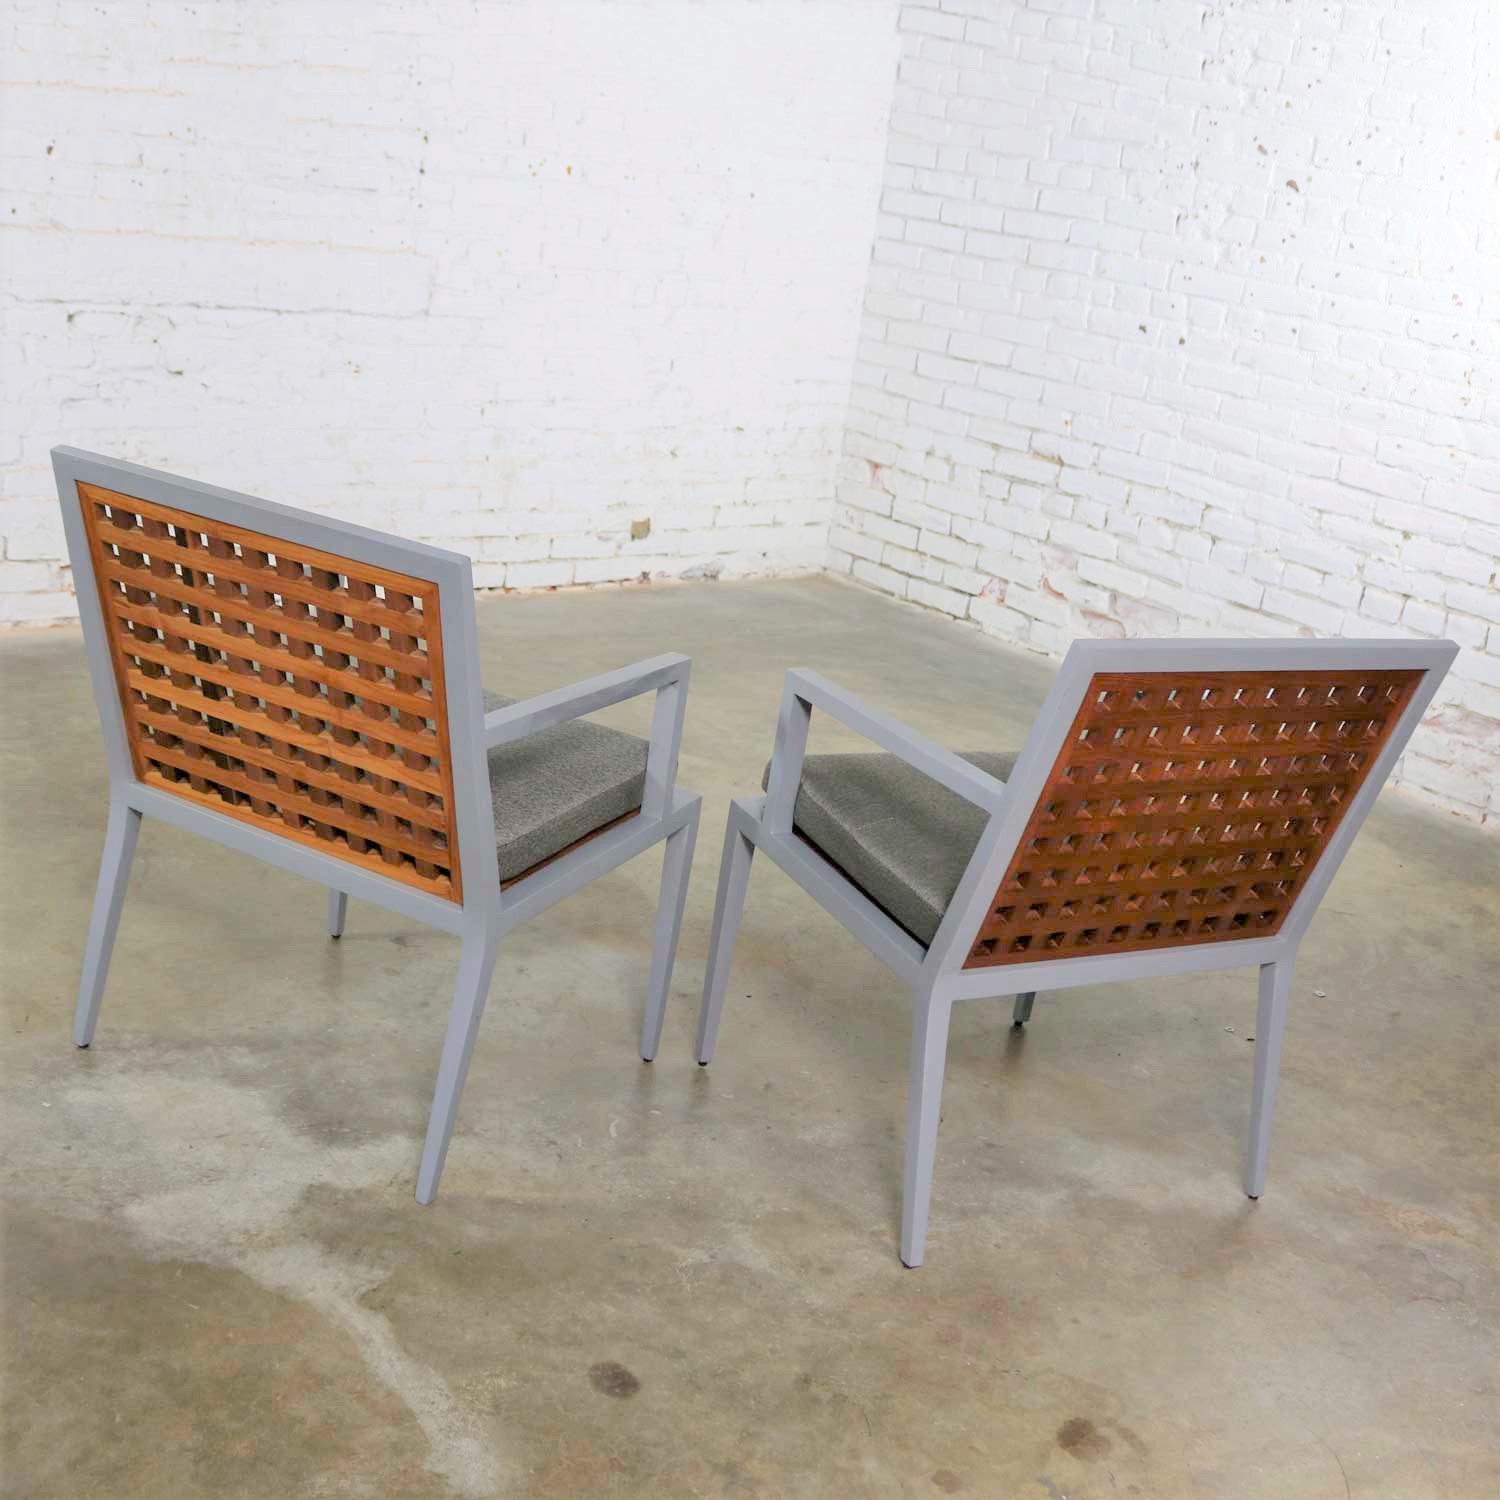 Pair of Aluminum and Teak Archetype Patio Chairs by Michael Vanderbyl for McGuire